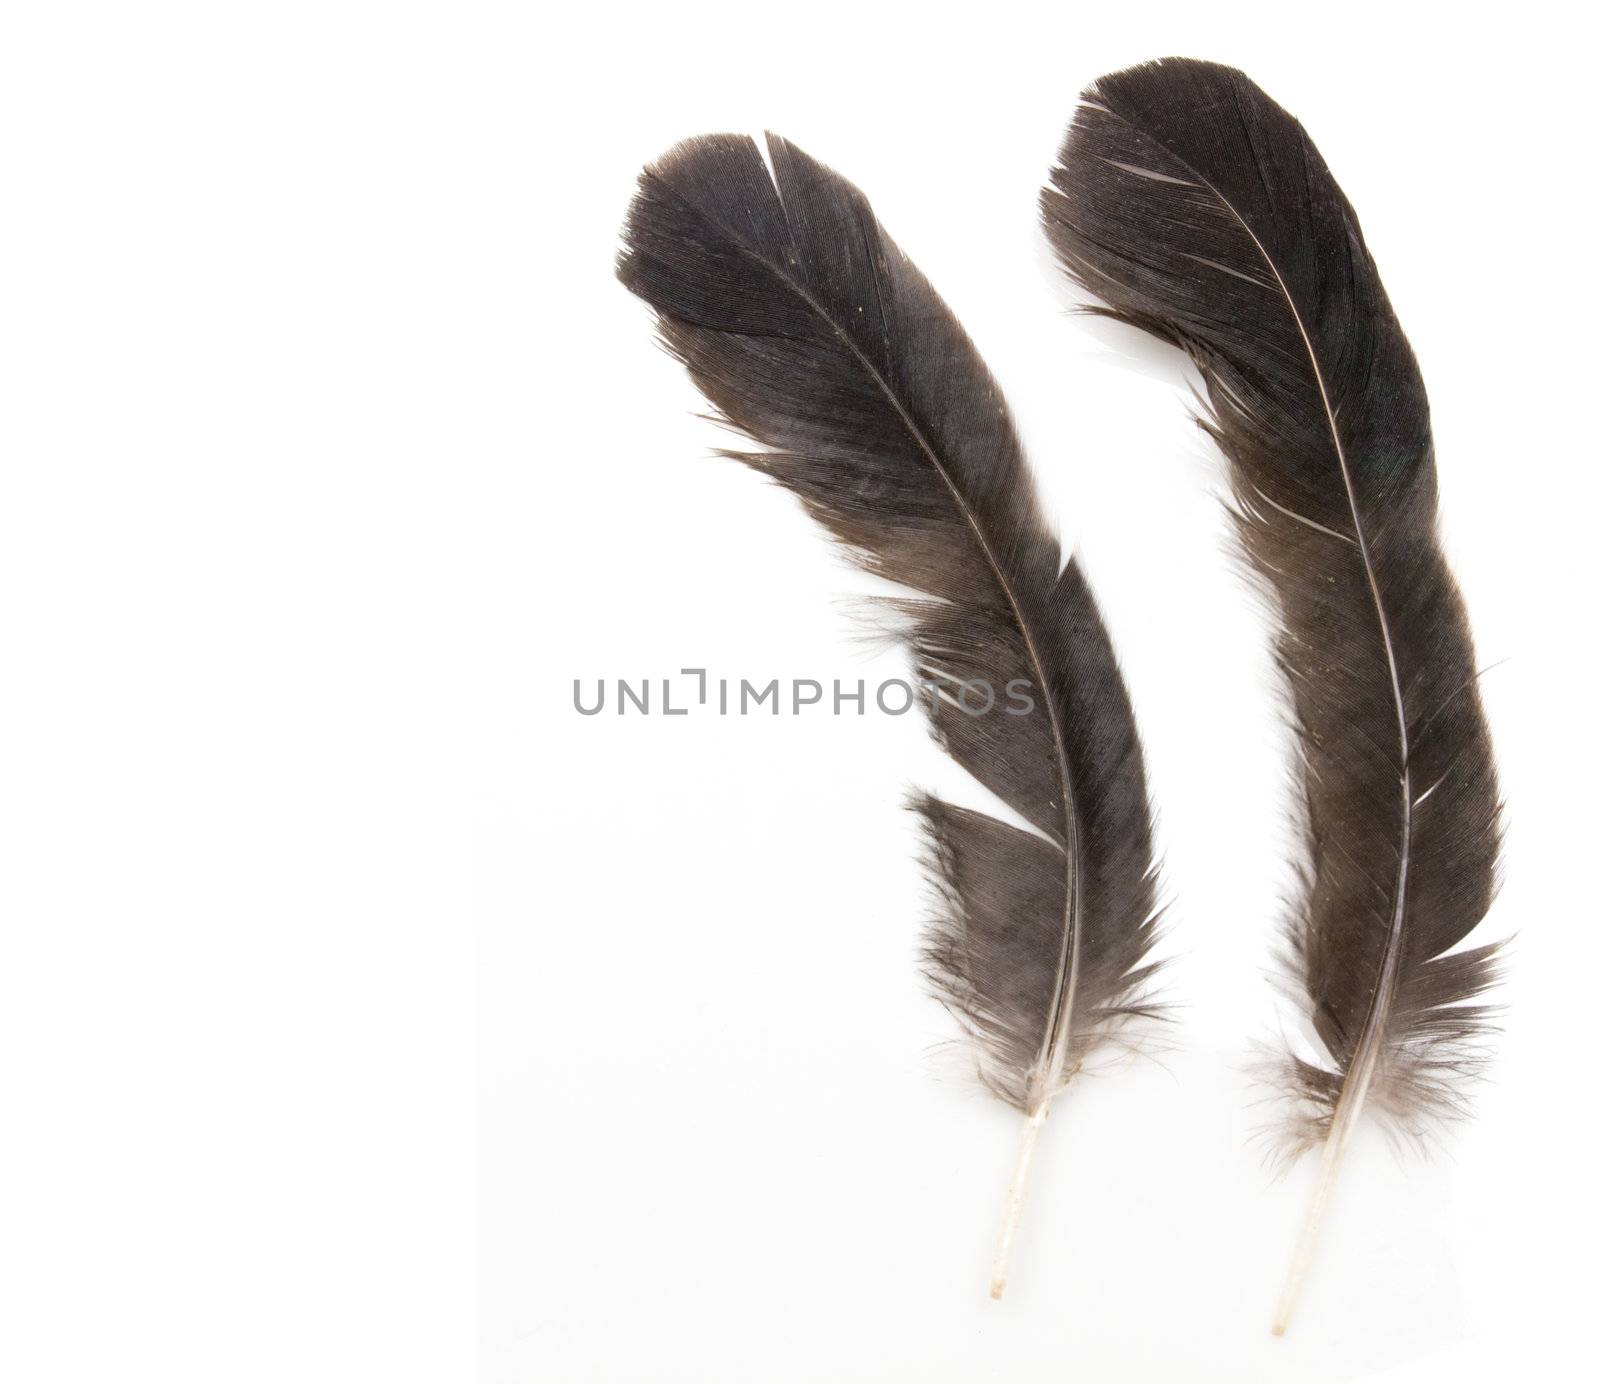 Two raven feathers on white background  by schankz